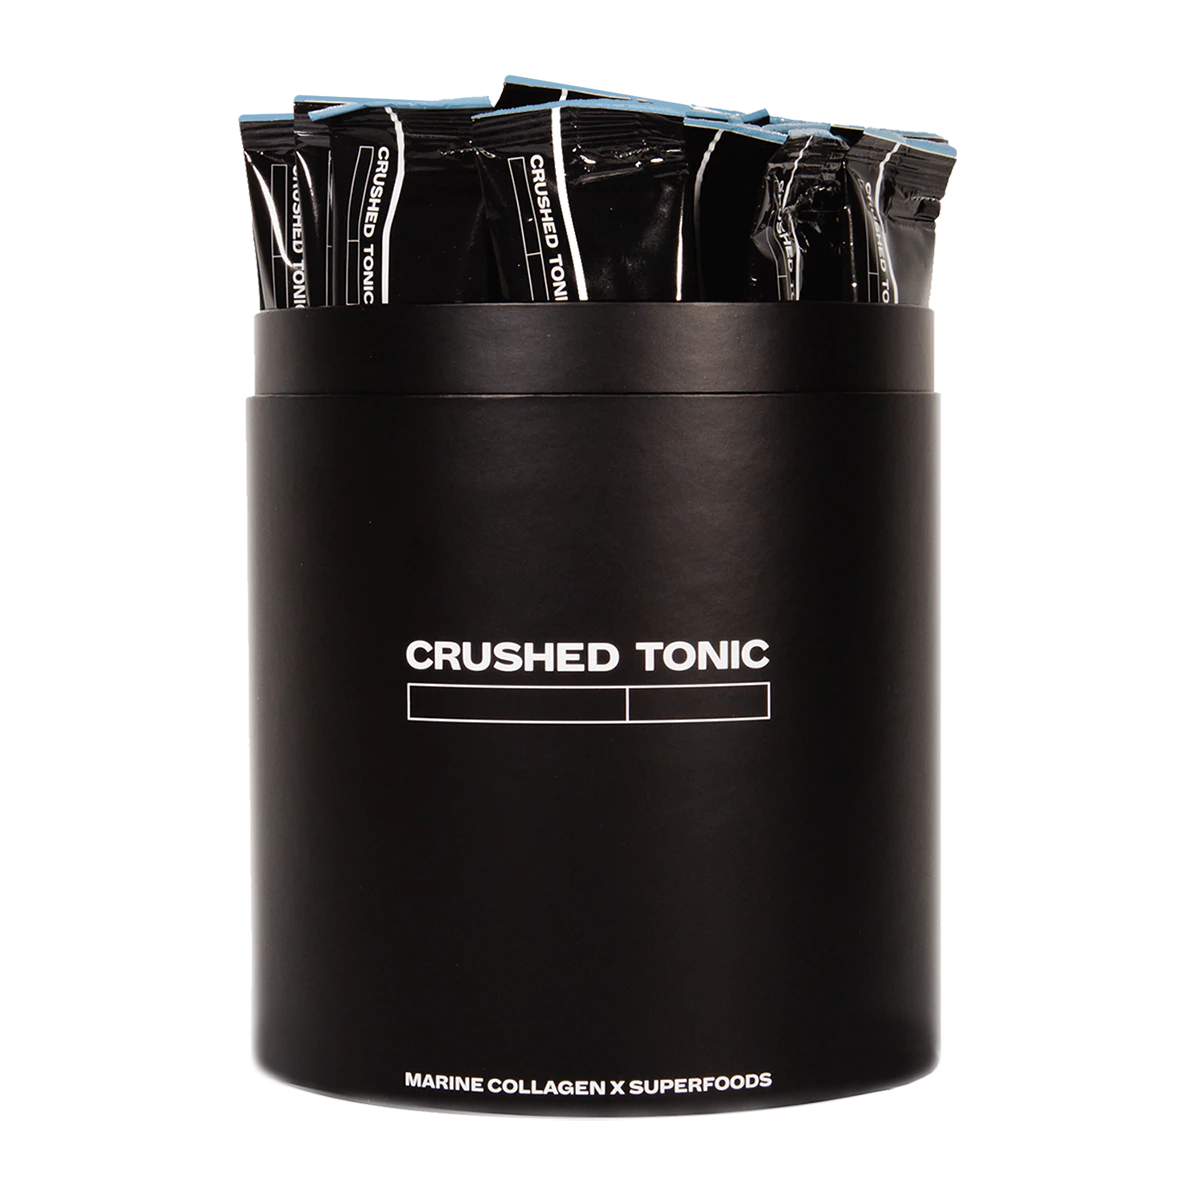 Pure Unflavored Marine Collagen Crushes, Sachets by Crushed Tonic